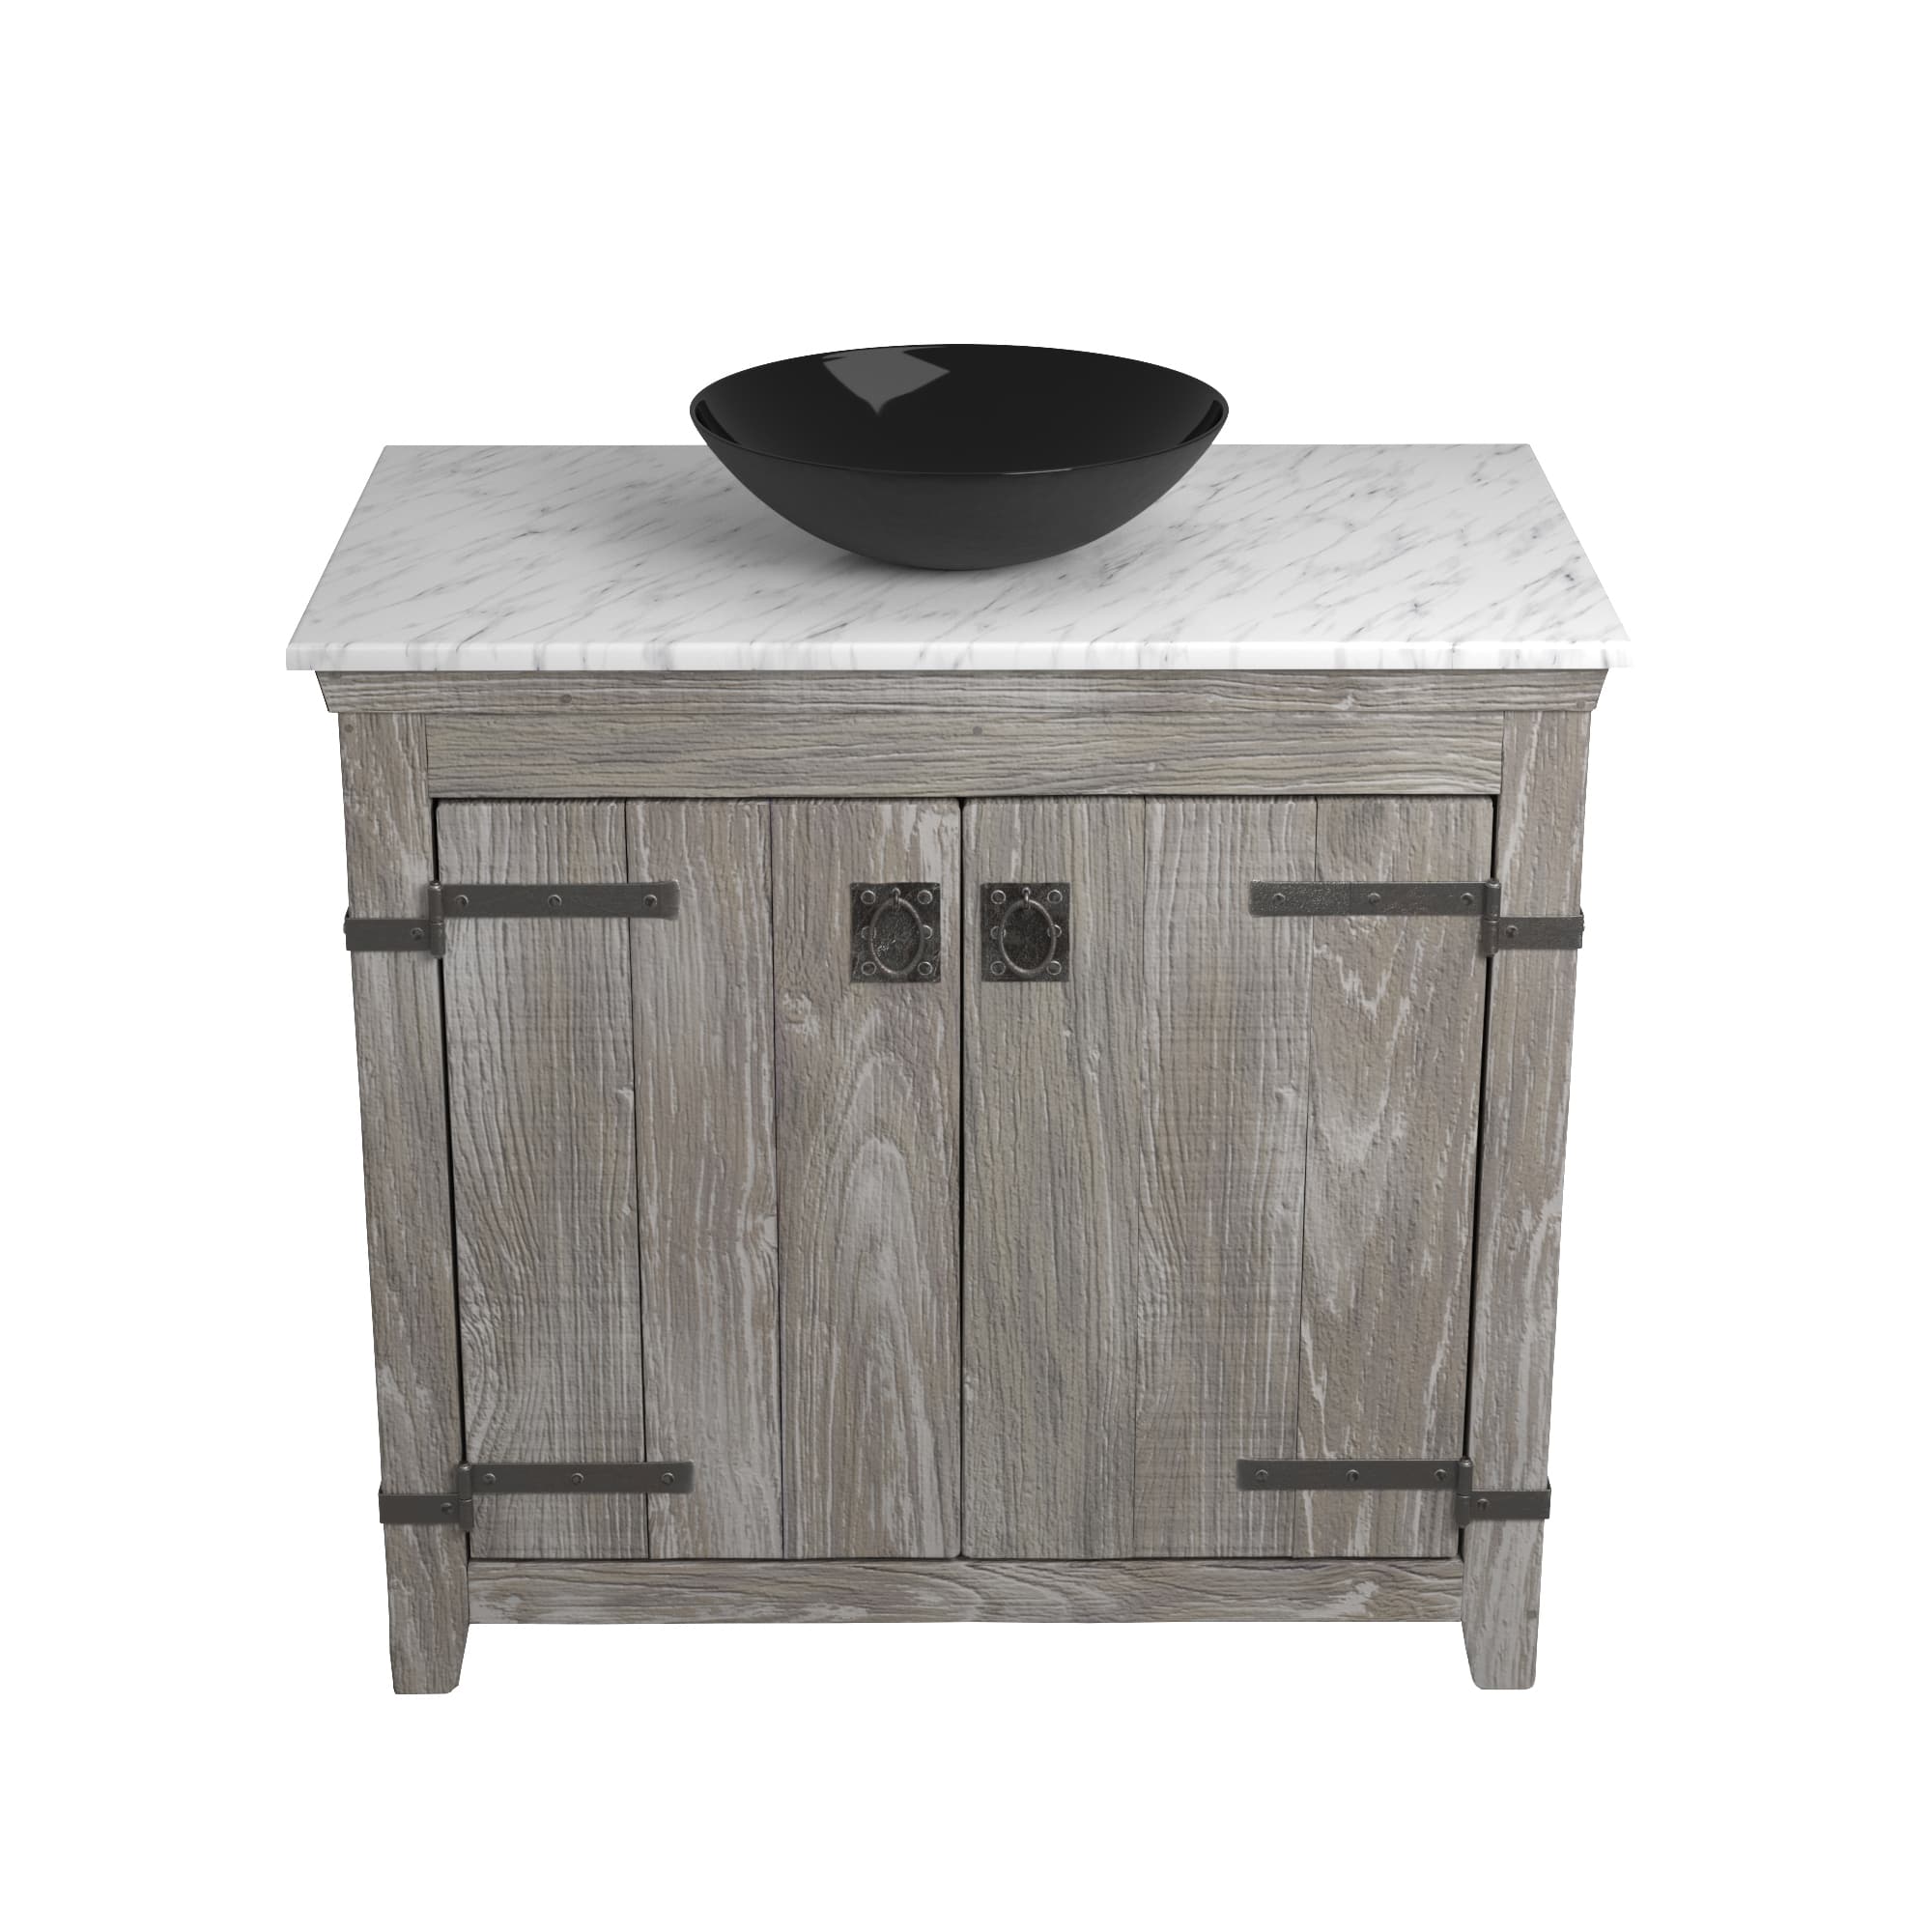 Native Trails 36" Americana Vanity in Driftwood with Carrara Marble Top and Verona in Abyss, Single Faucet Hole, BND36-VB-CT-MG-071